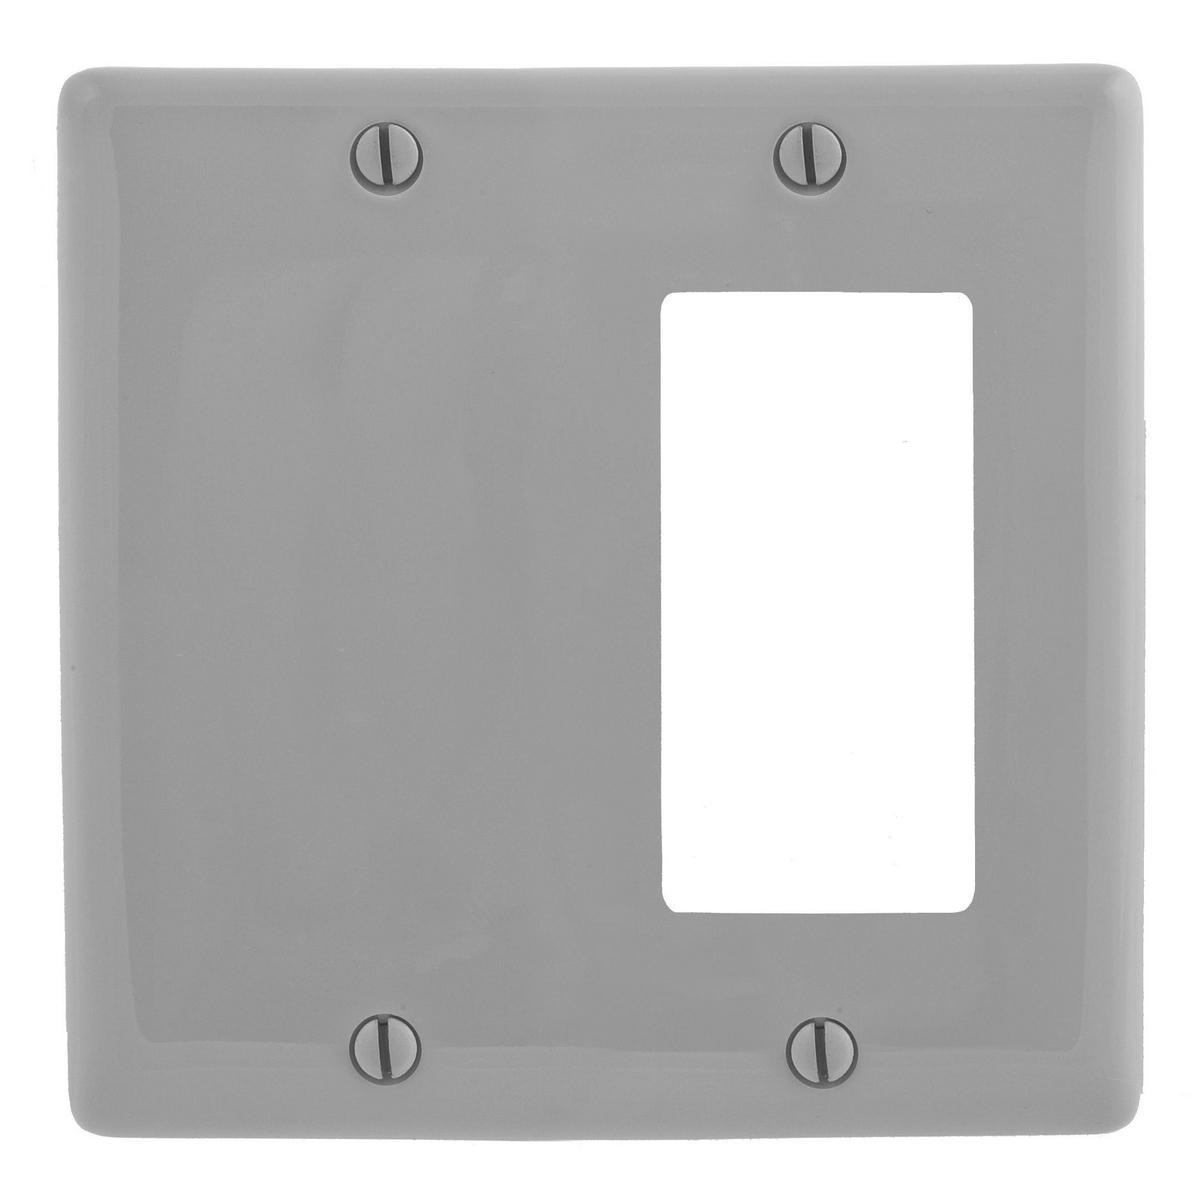 Hubbell NP1326GY Wallplates and Box Covers, Wallplate, Nylon, 2-Gang, 1) Decorator 1) Blank, Gray  ; Reinforcement ribs for extra strength ; High-impact, self-extinguishing nylon material ; Captive screw feature holds mounting screw in place ; Standard Size is 1/8" larger